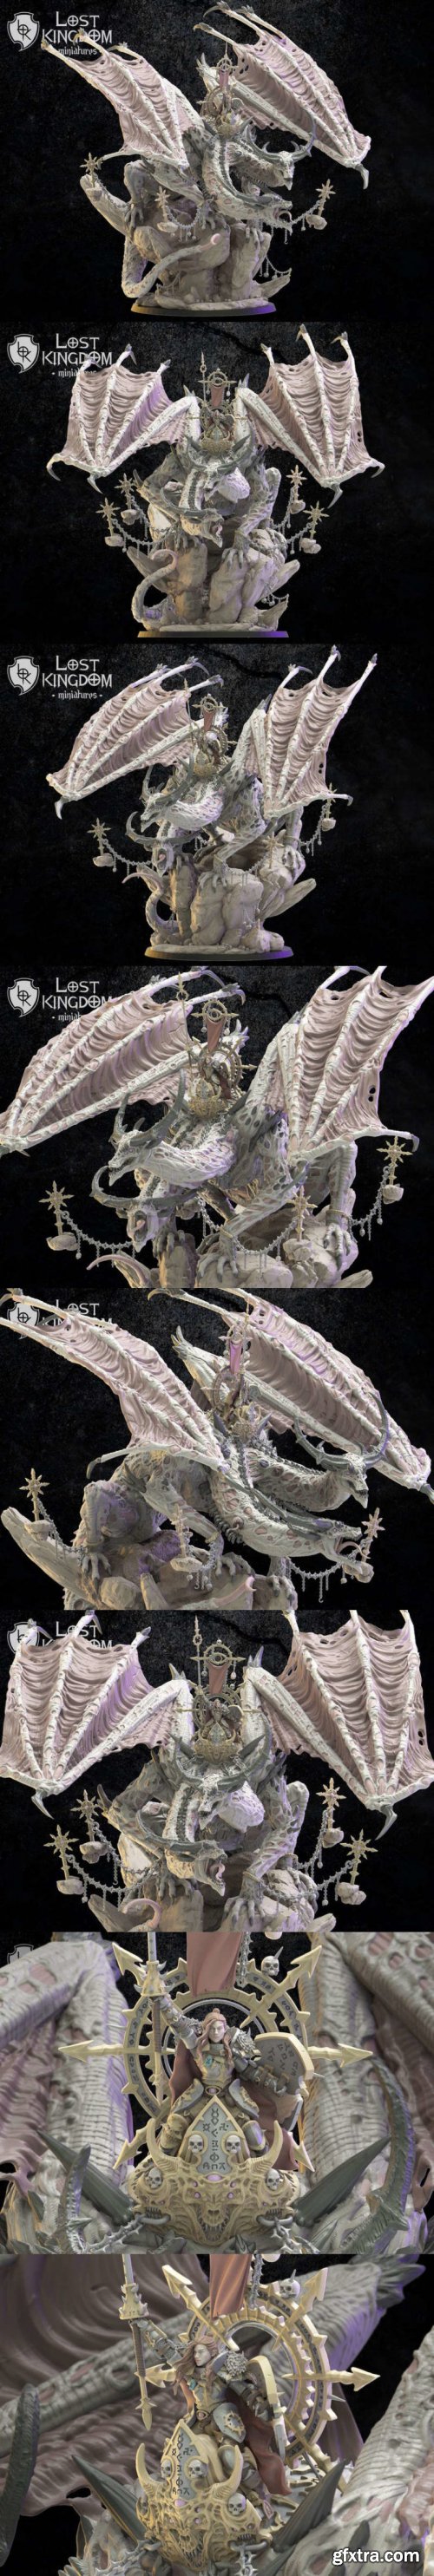 Owoyd the Unstoppable Gibraela the Mistress of Chaos – 3D Print Model